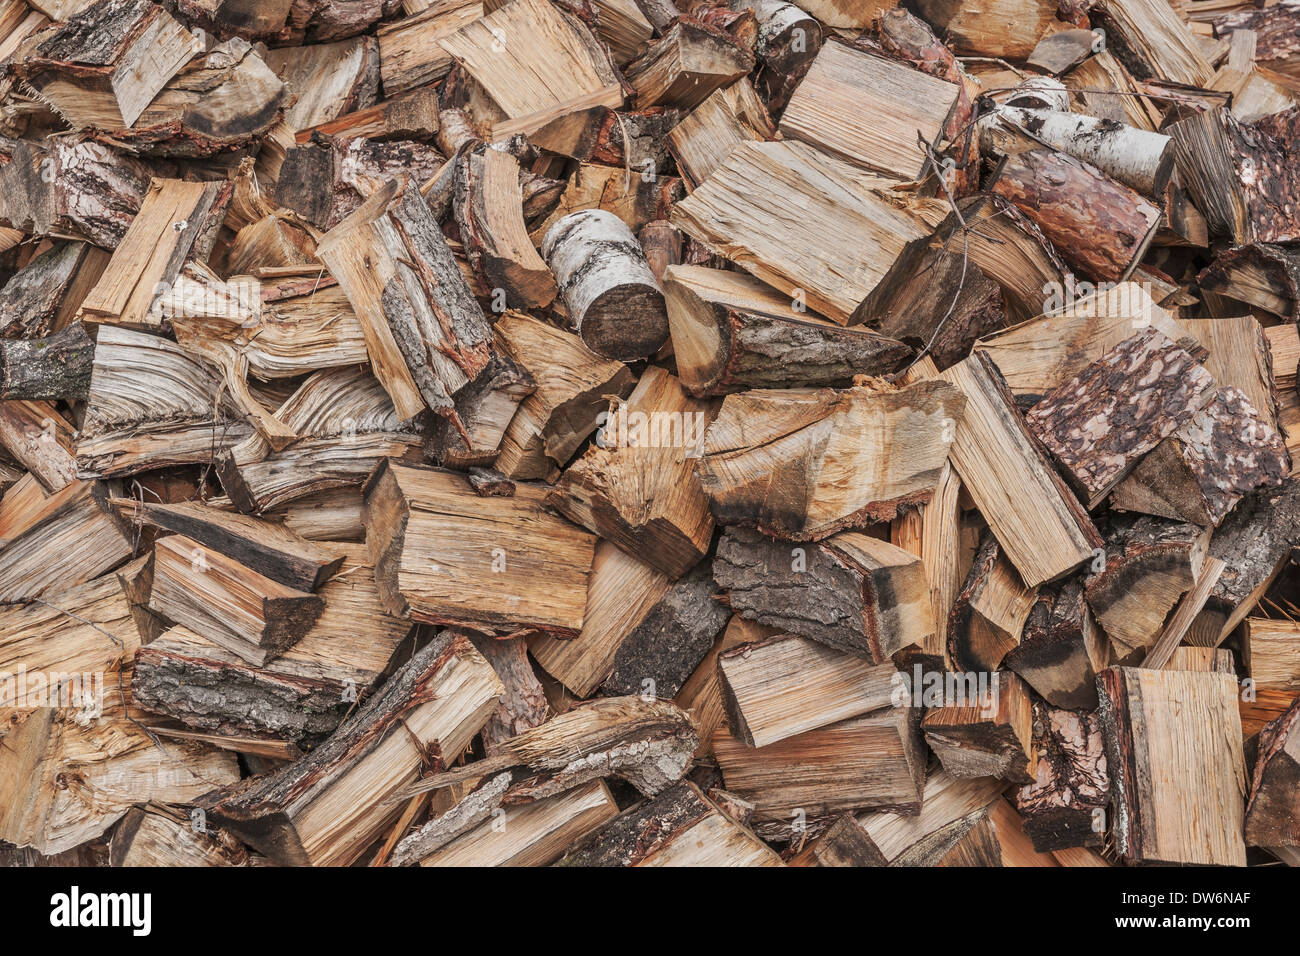 Many pieces of firewood on a heap. Stock Photo